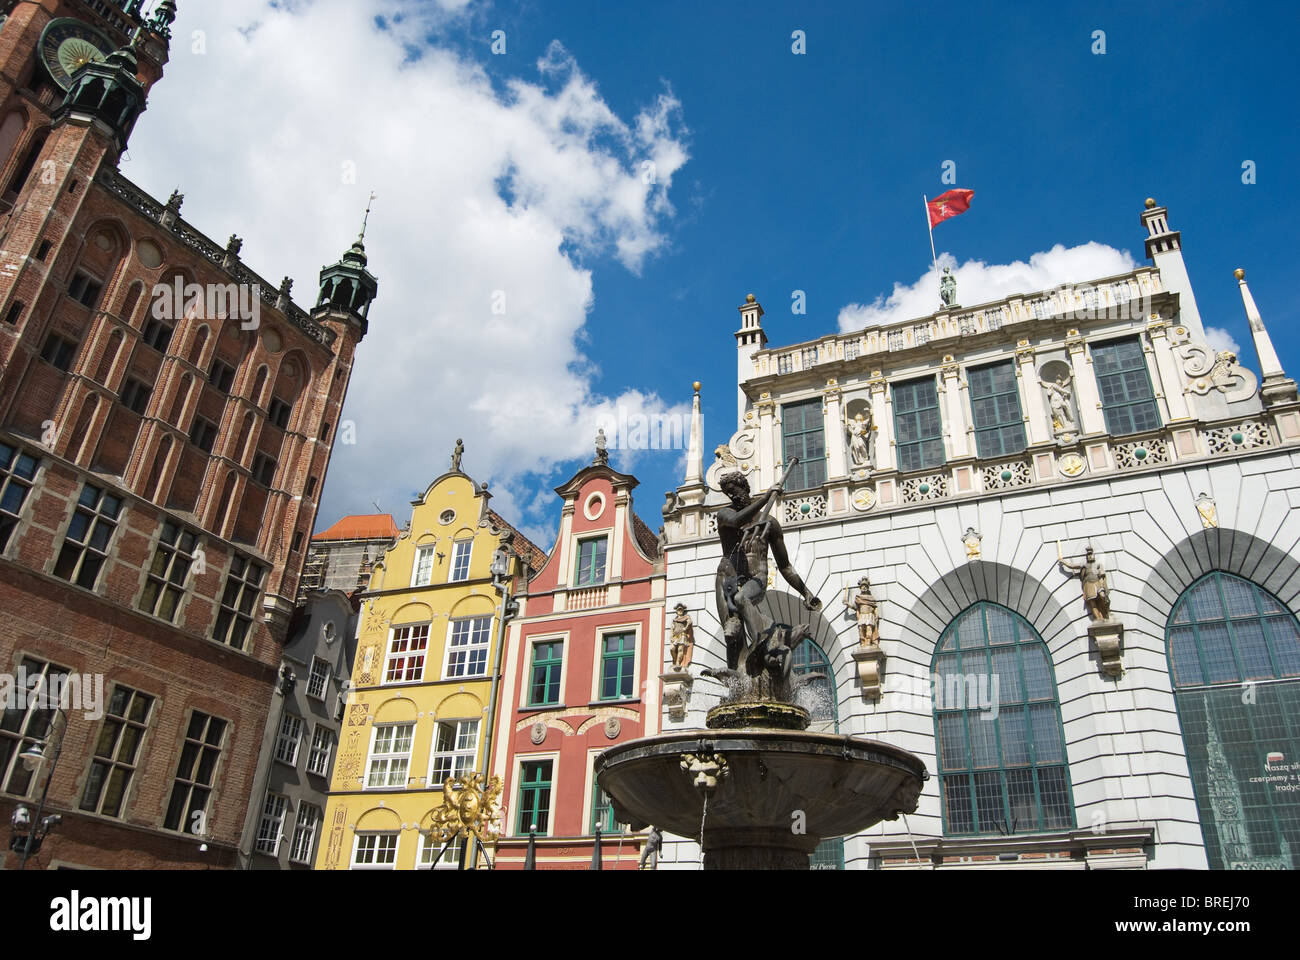 Gdansk City Hall building and Neptune statue in Dluga street, Gdansk, Poland Stock Photo